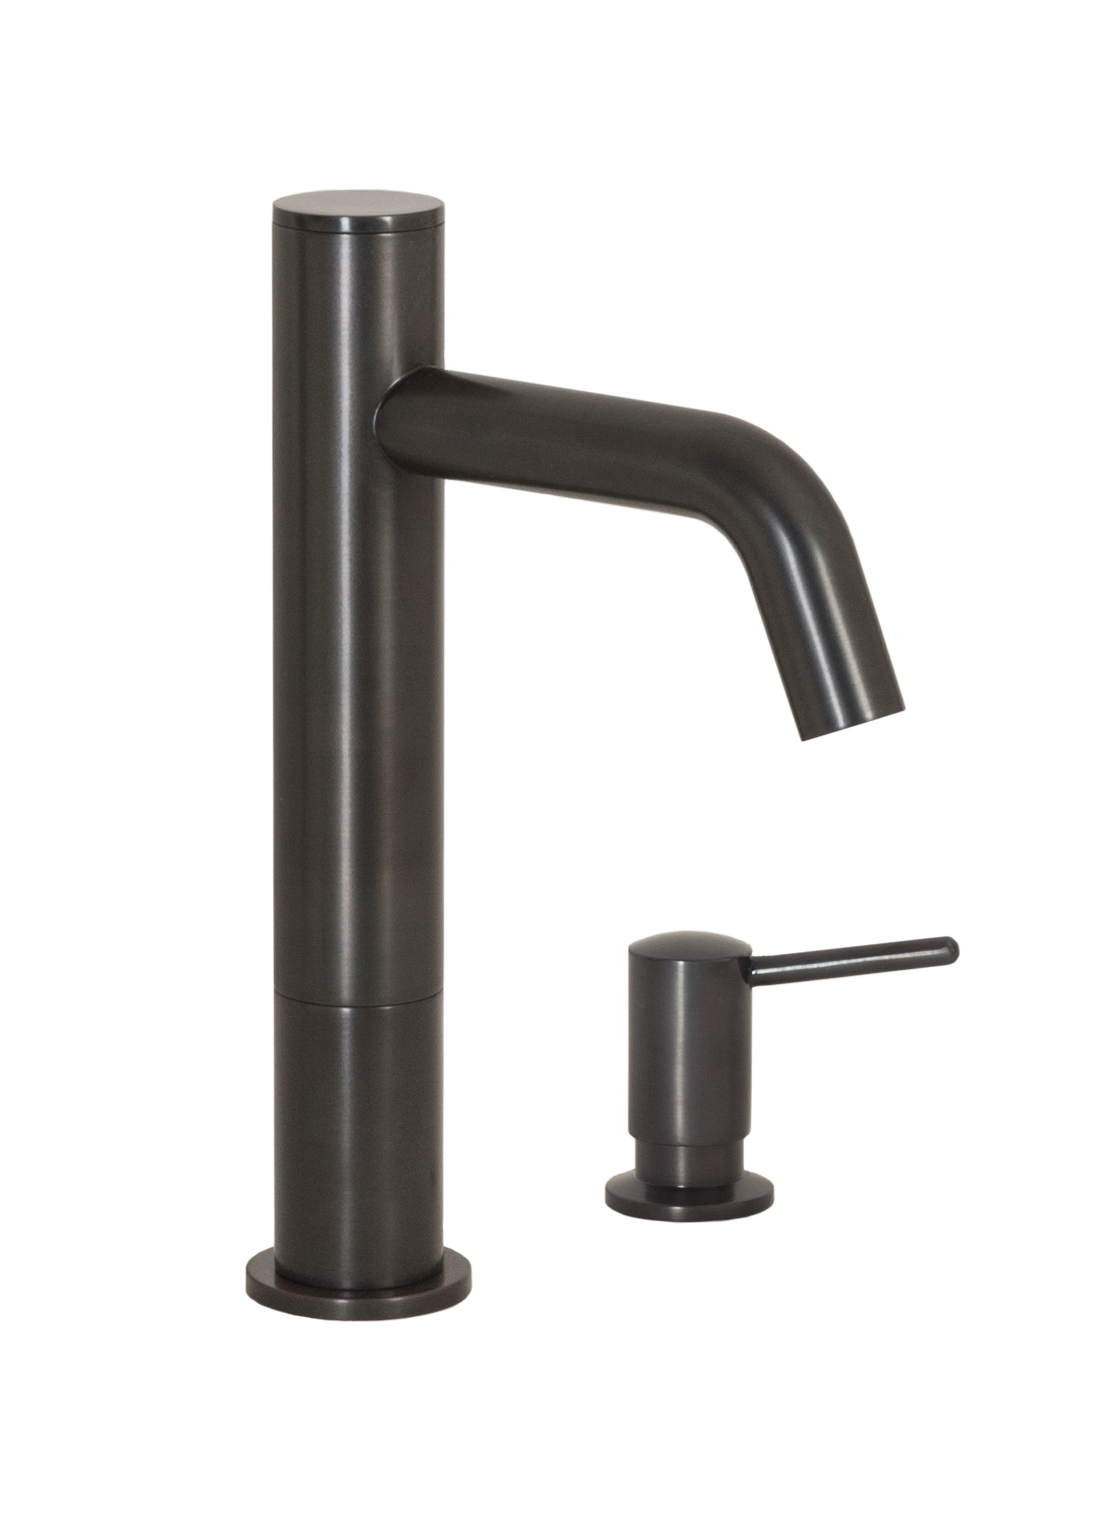 FA-3263S Automatic Faucet with 6” Spout Reach, 3” Riser and Manual Soap Dispenser In Oil Rubbed Bronze